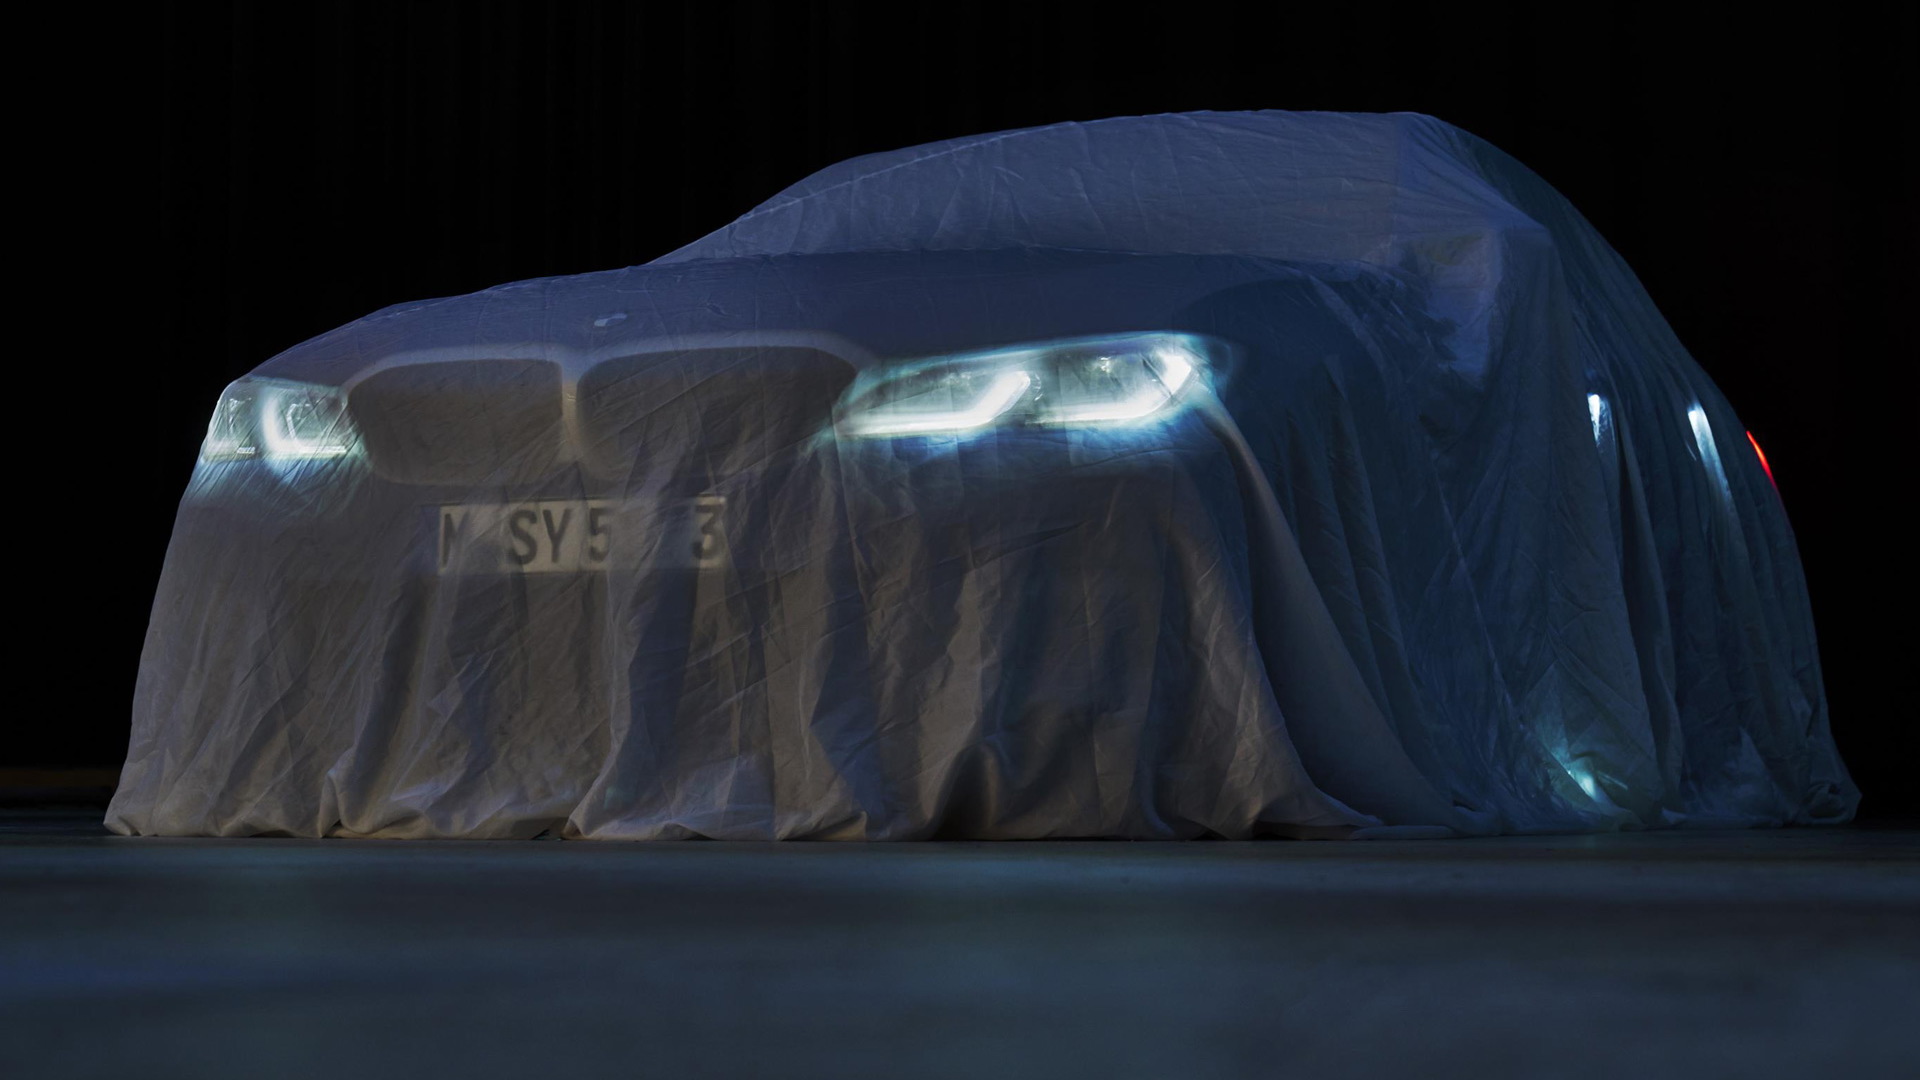 Teaser for 2019 BMW 3-Series debuting at 2018 Paris auto show